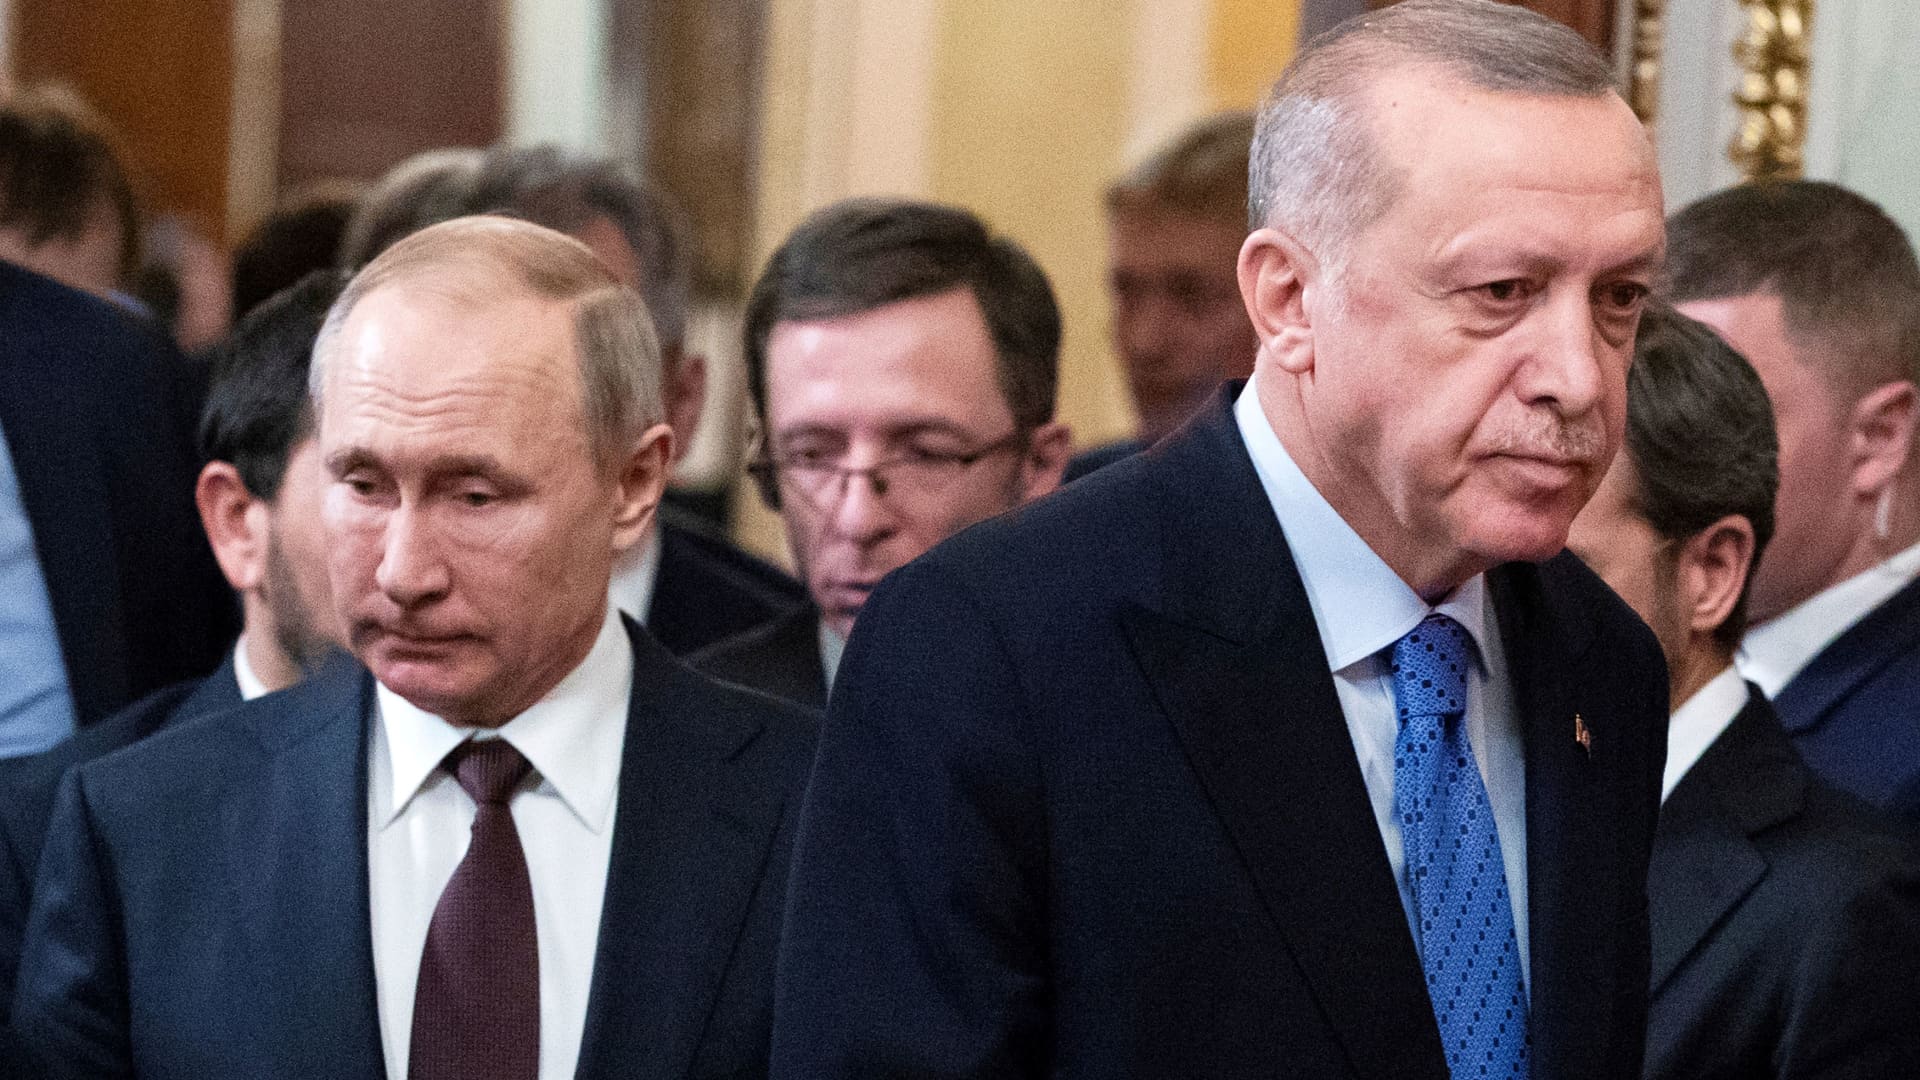 Russian President Vladimir Putin and Turkish President Tayyip Erdogan arrive for a news conference following their talks in Moscow, Russia March 5, 2020.